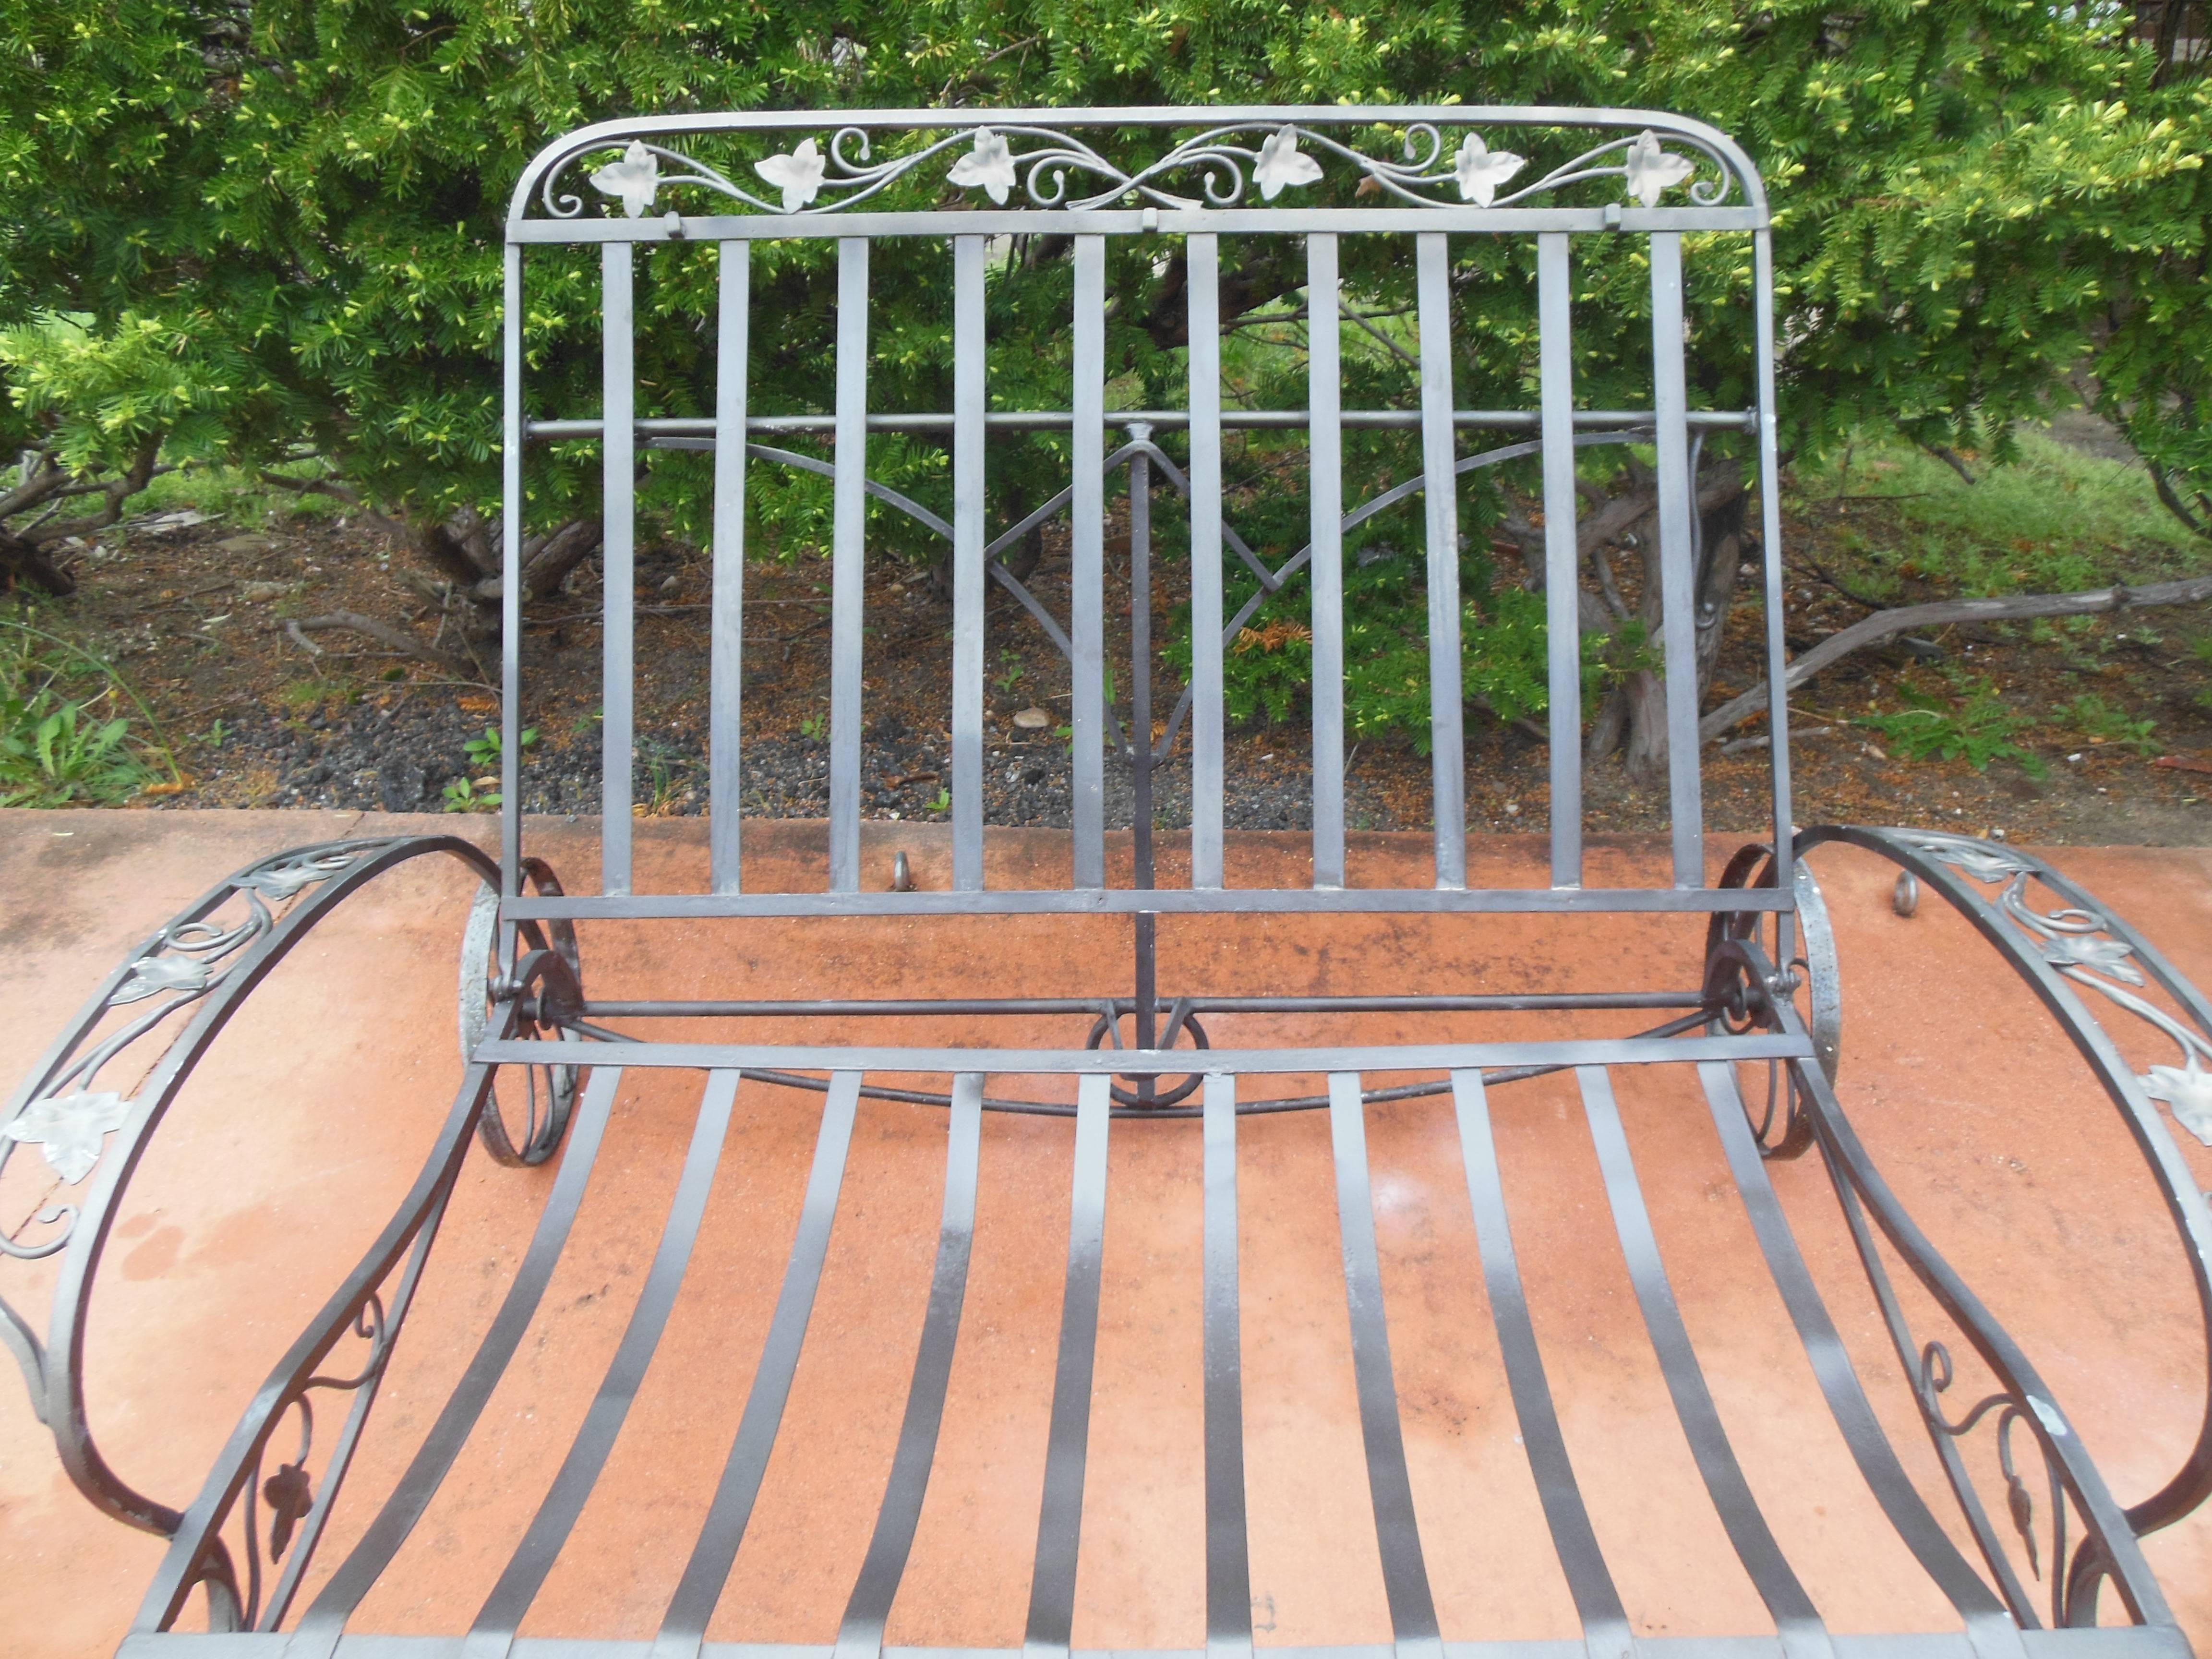 This is a genuine wrought iron double chaise by Salterini in the Mt Vernon pattern. Please ask to see a xerox from the Salterini catalog of the chaise that 
documents authentication. This Mt Vernon Double chaise is from an extensive.
Salterini